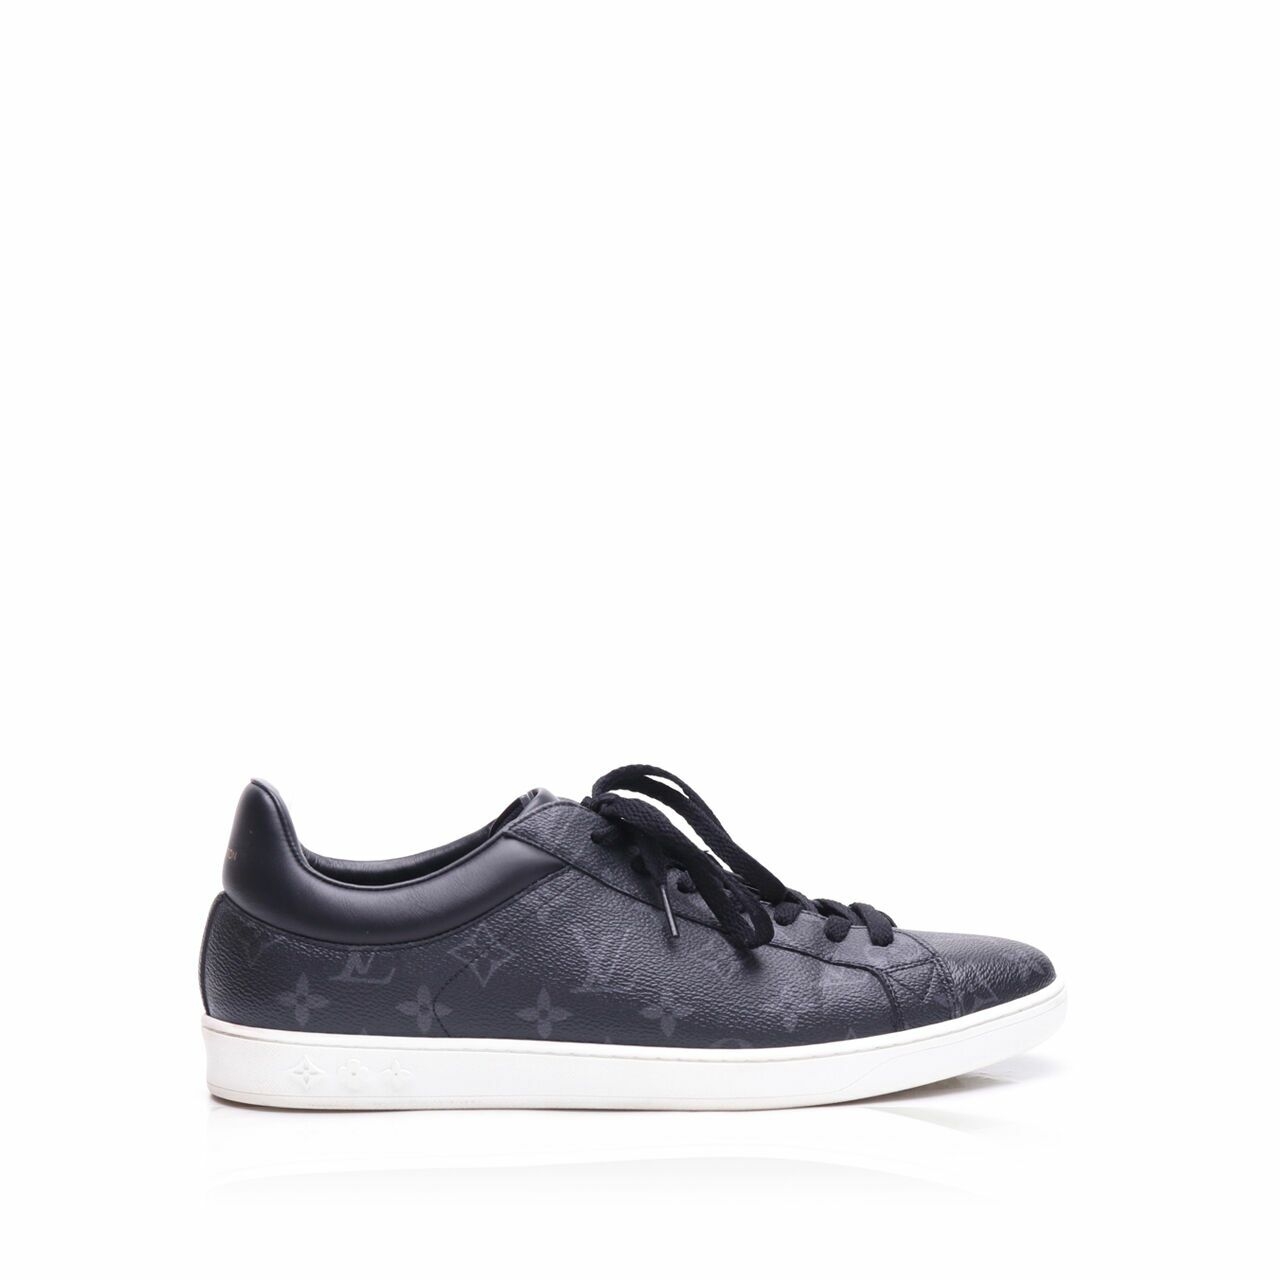 Louis Vuitton Luxembourg Black Sneakers